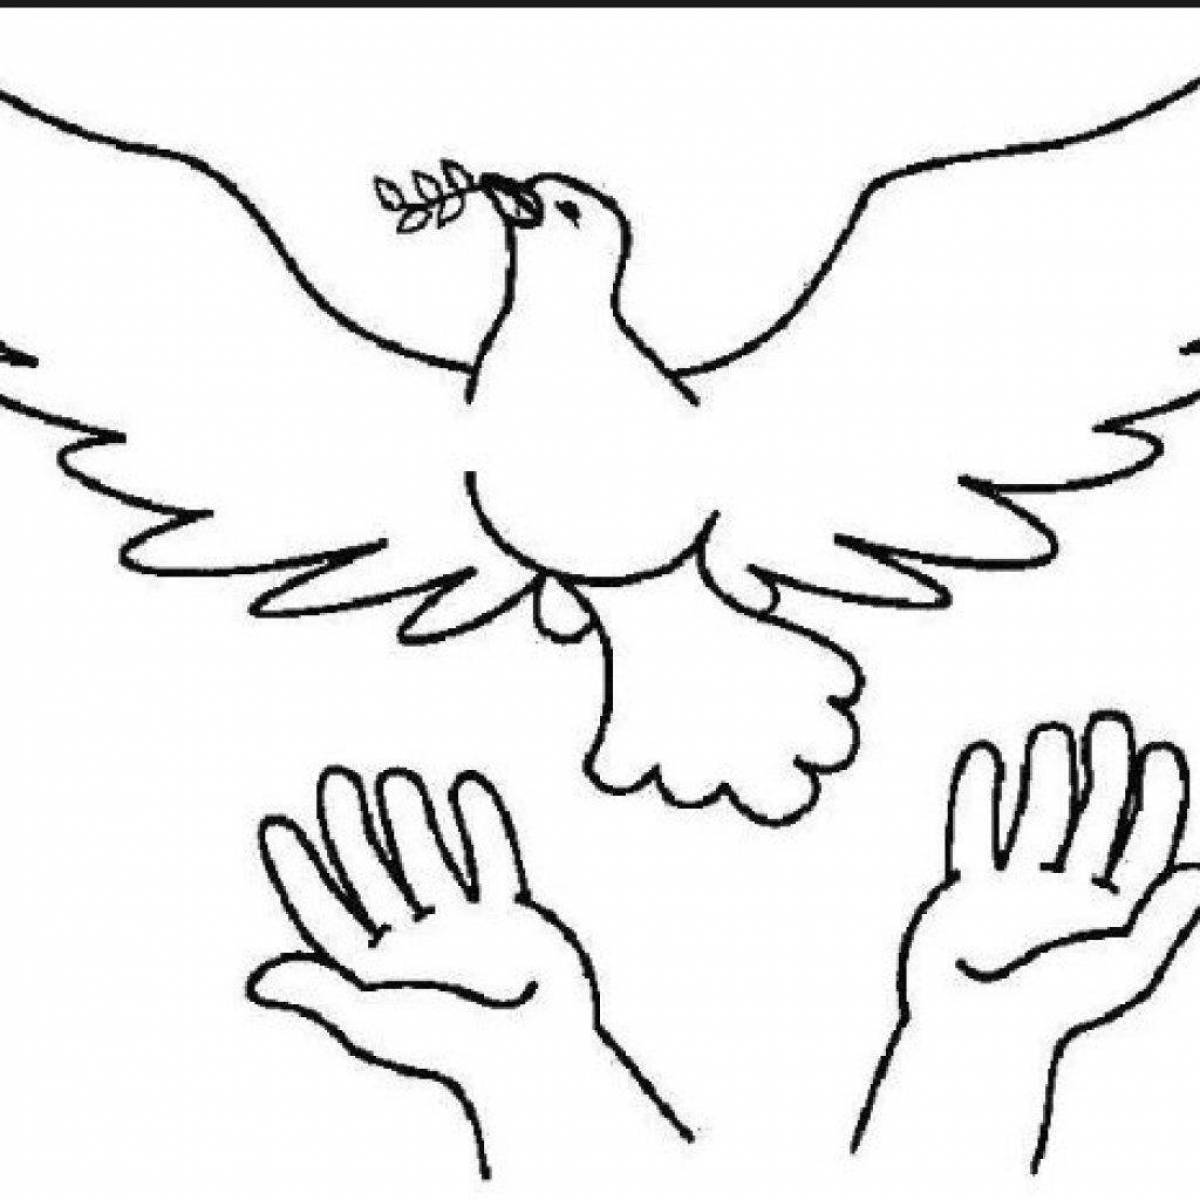 Joyful world peace without war coloring pages